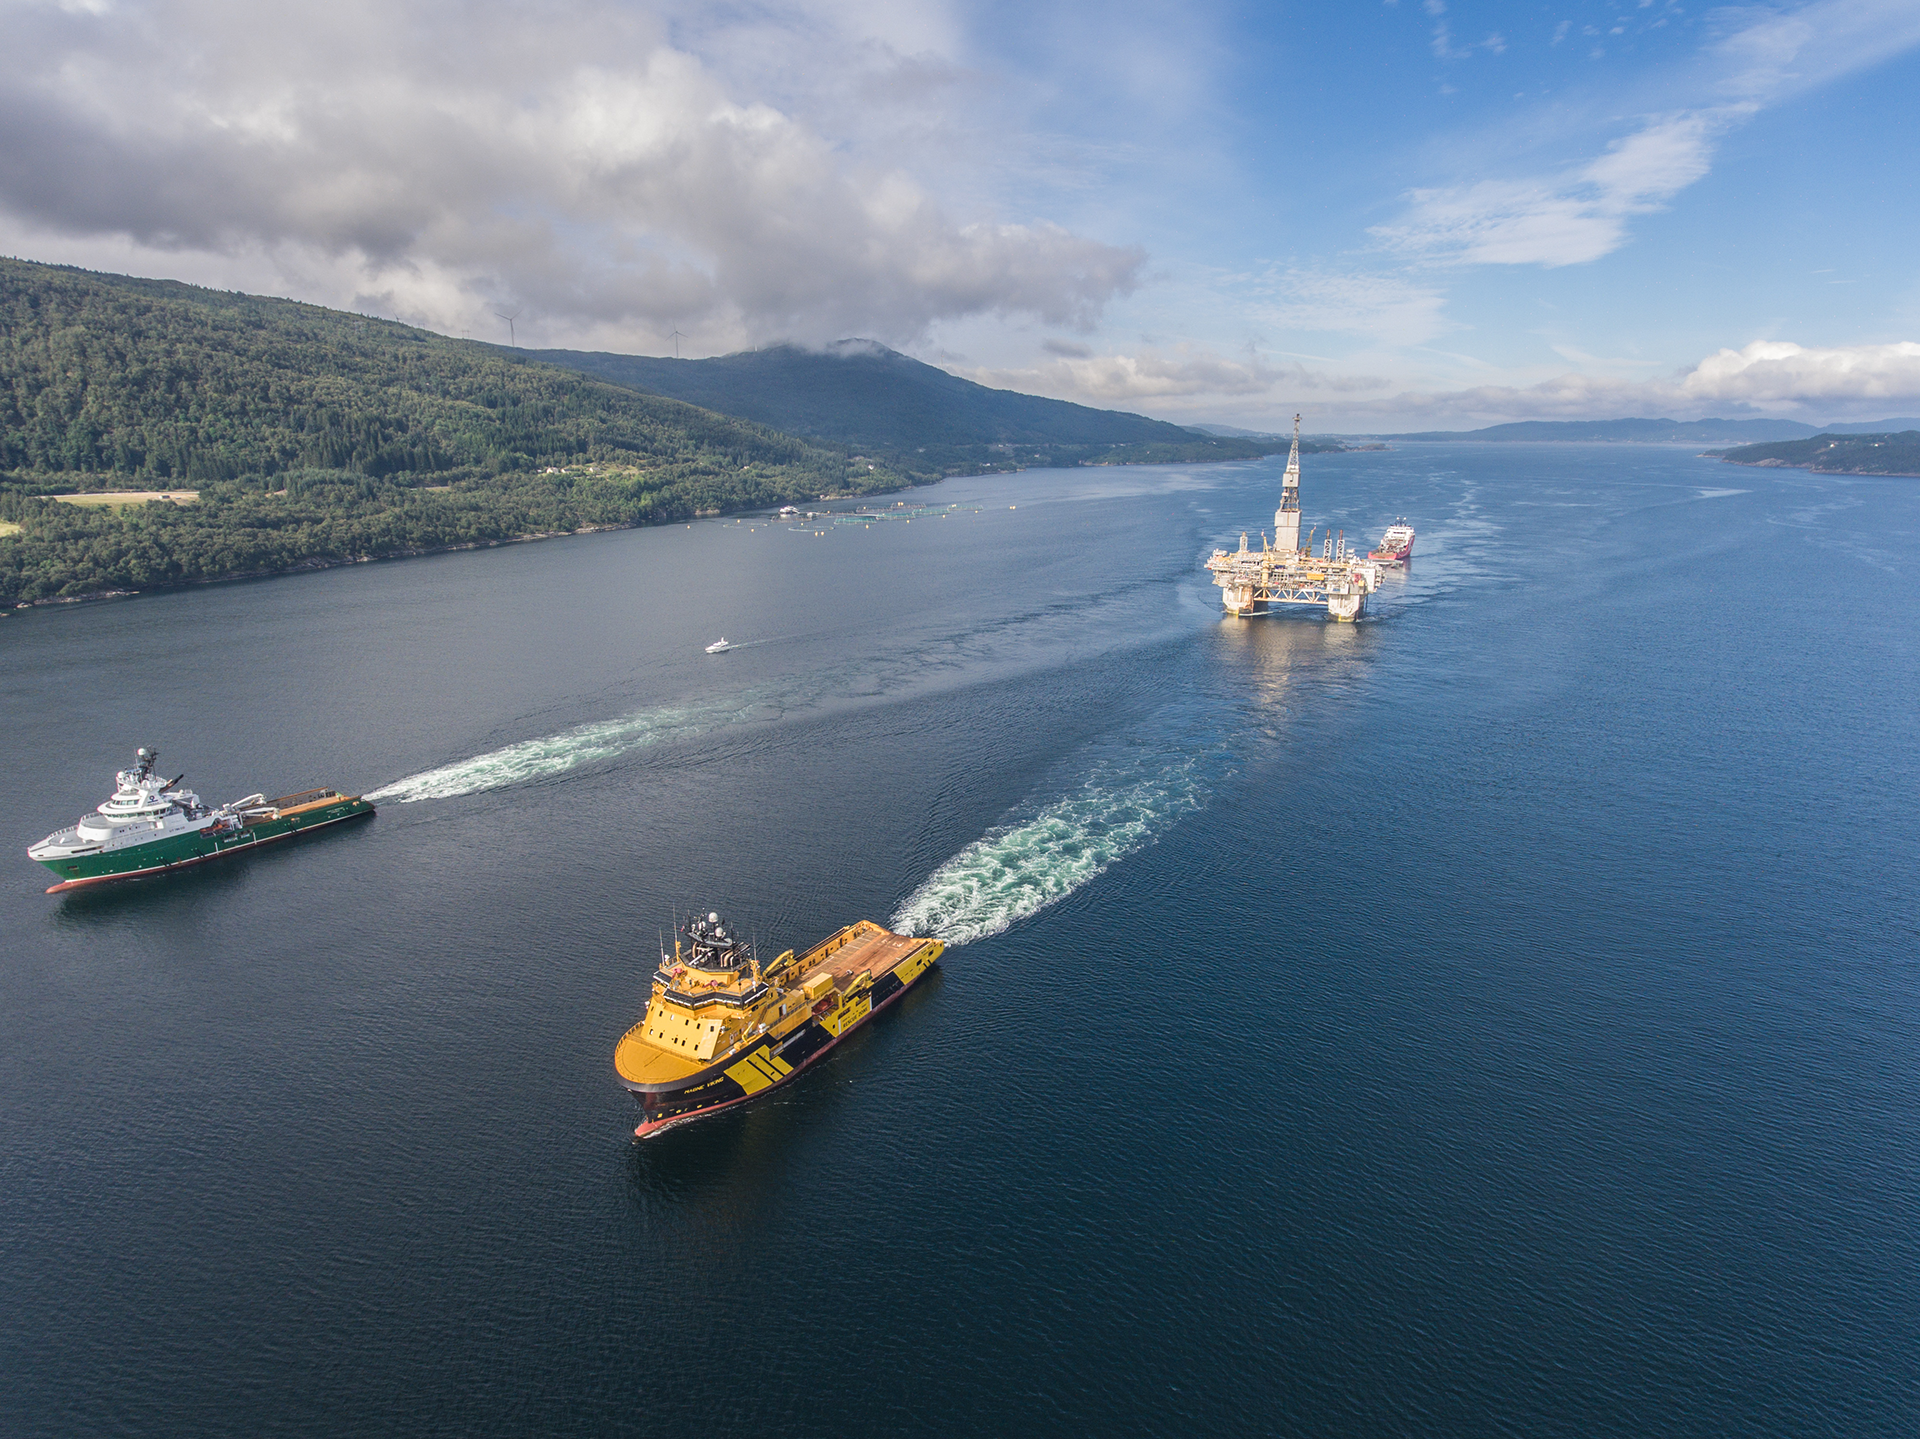 Production on Njord was halted in 2016 and the facilities were brought to shore for upgrades after cracks were discovered in the structure. Production will resume in 2020. (Photo: Statoil).